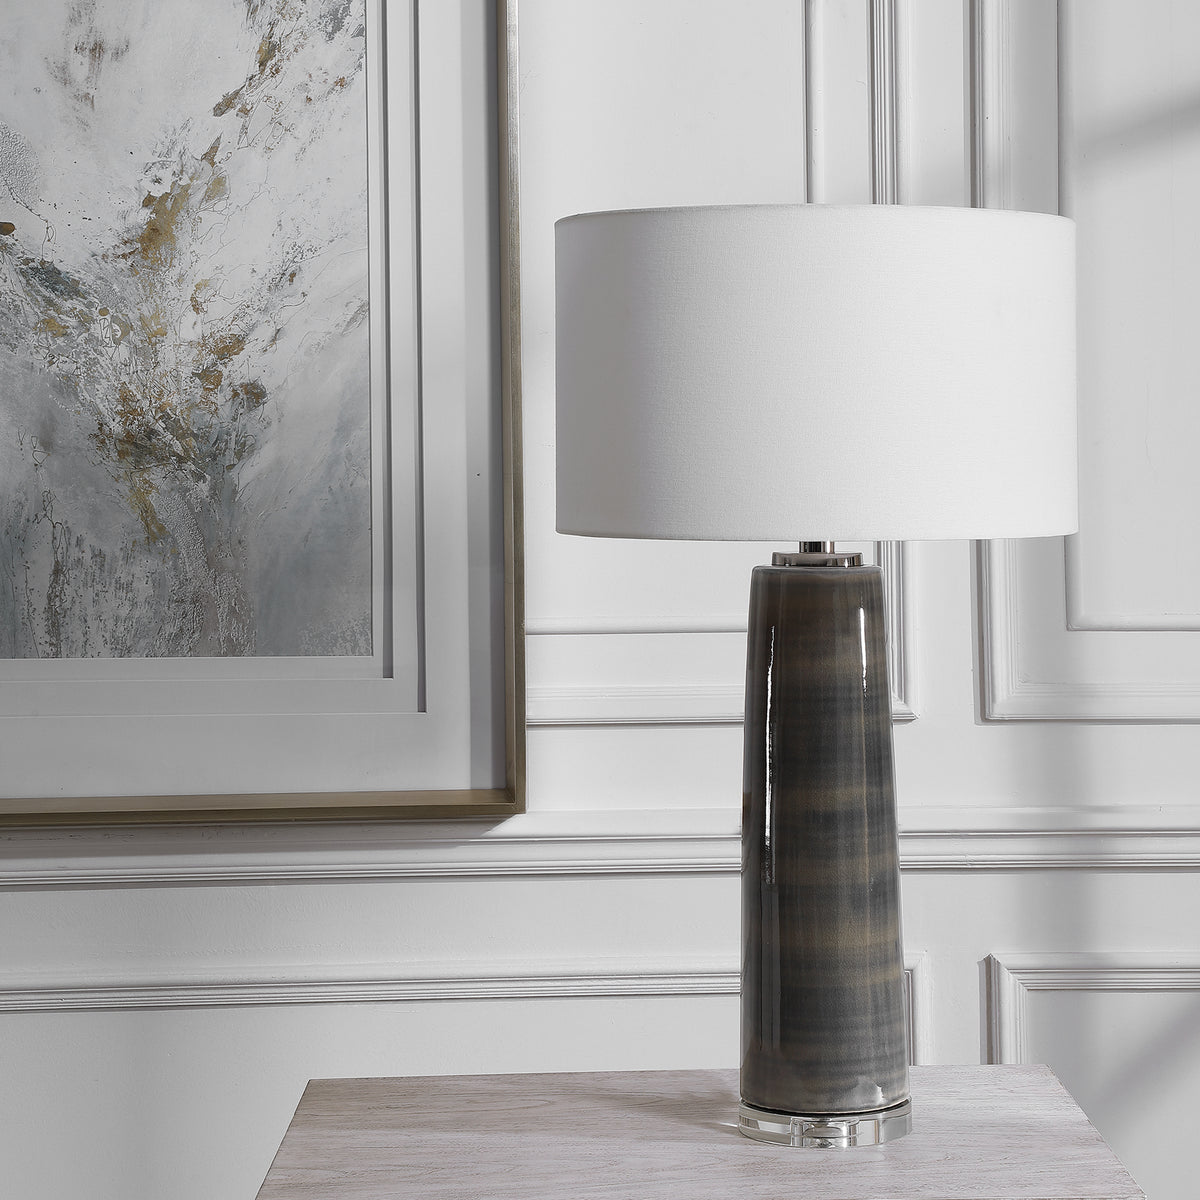 Uttermost Seurat Charcoal Table Lamp